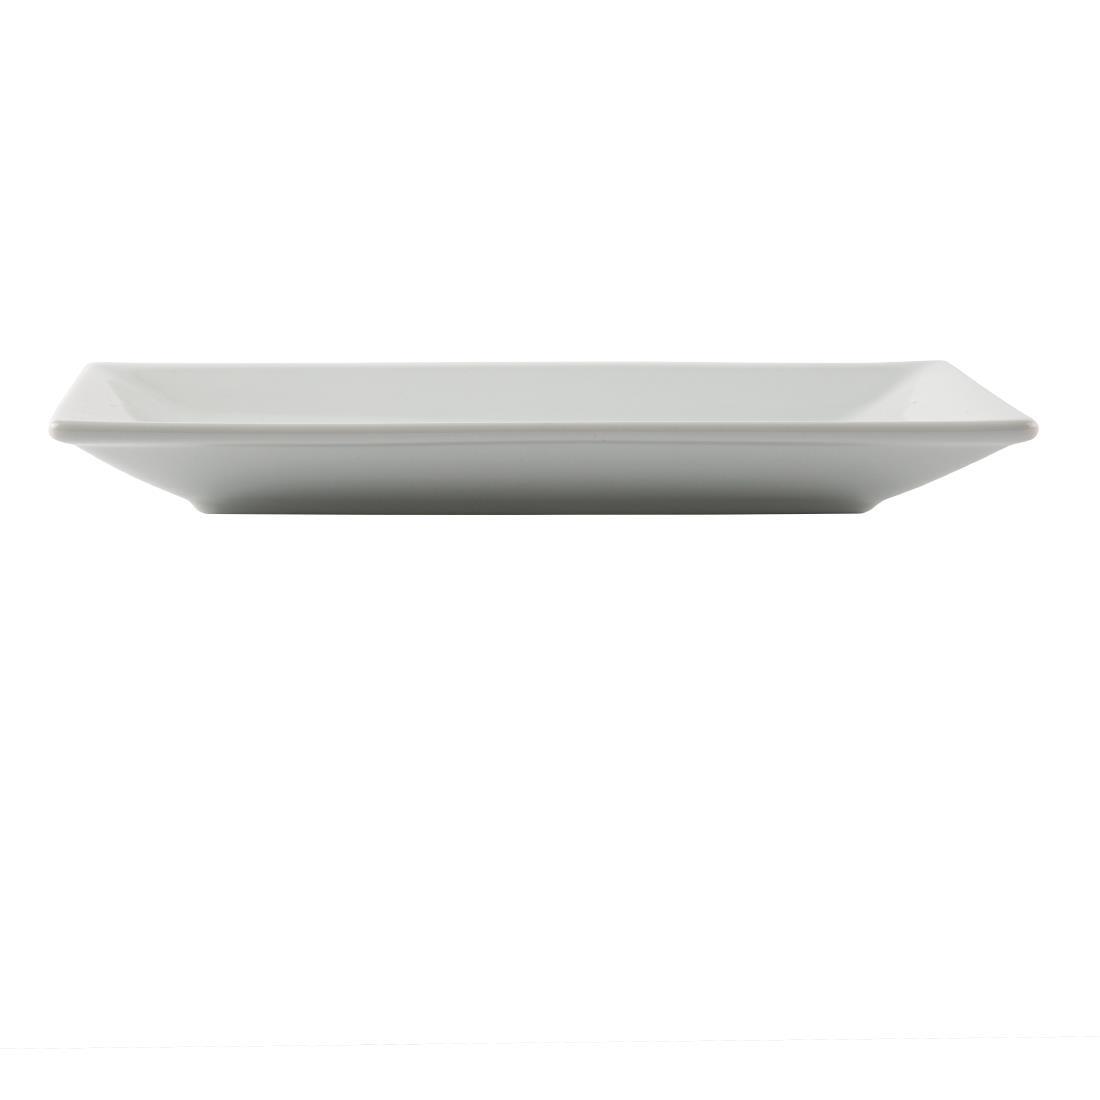 Olympia Serving Rectangular Platters 250x 150mm (Pack of 4) - CC894  - 4